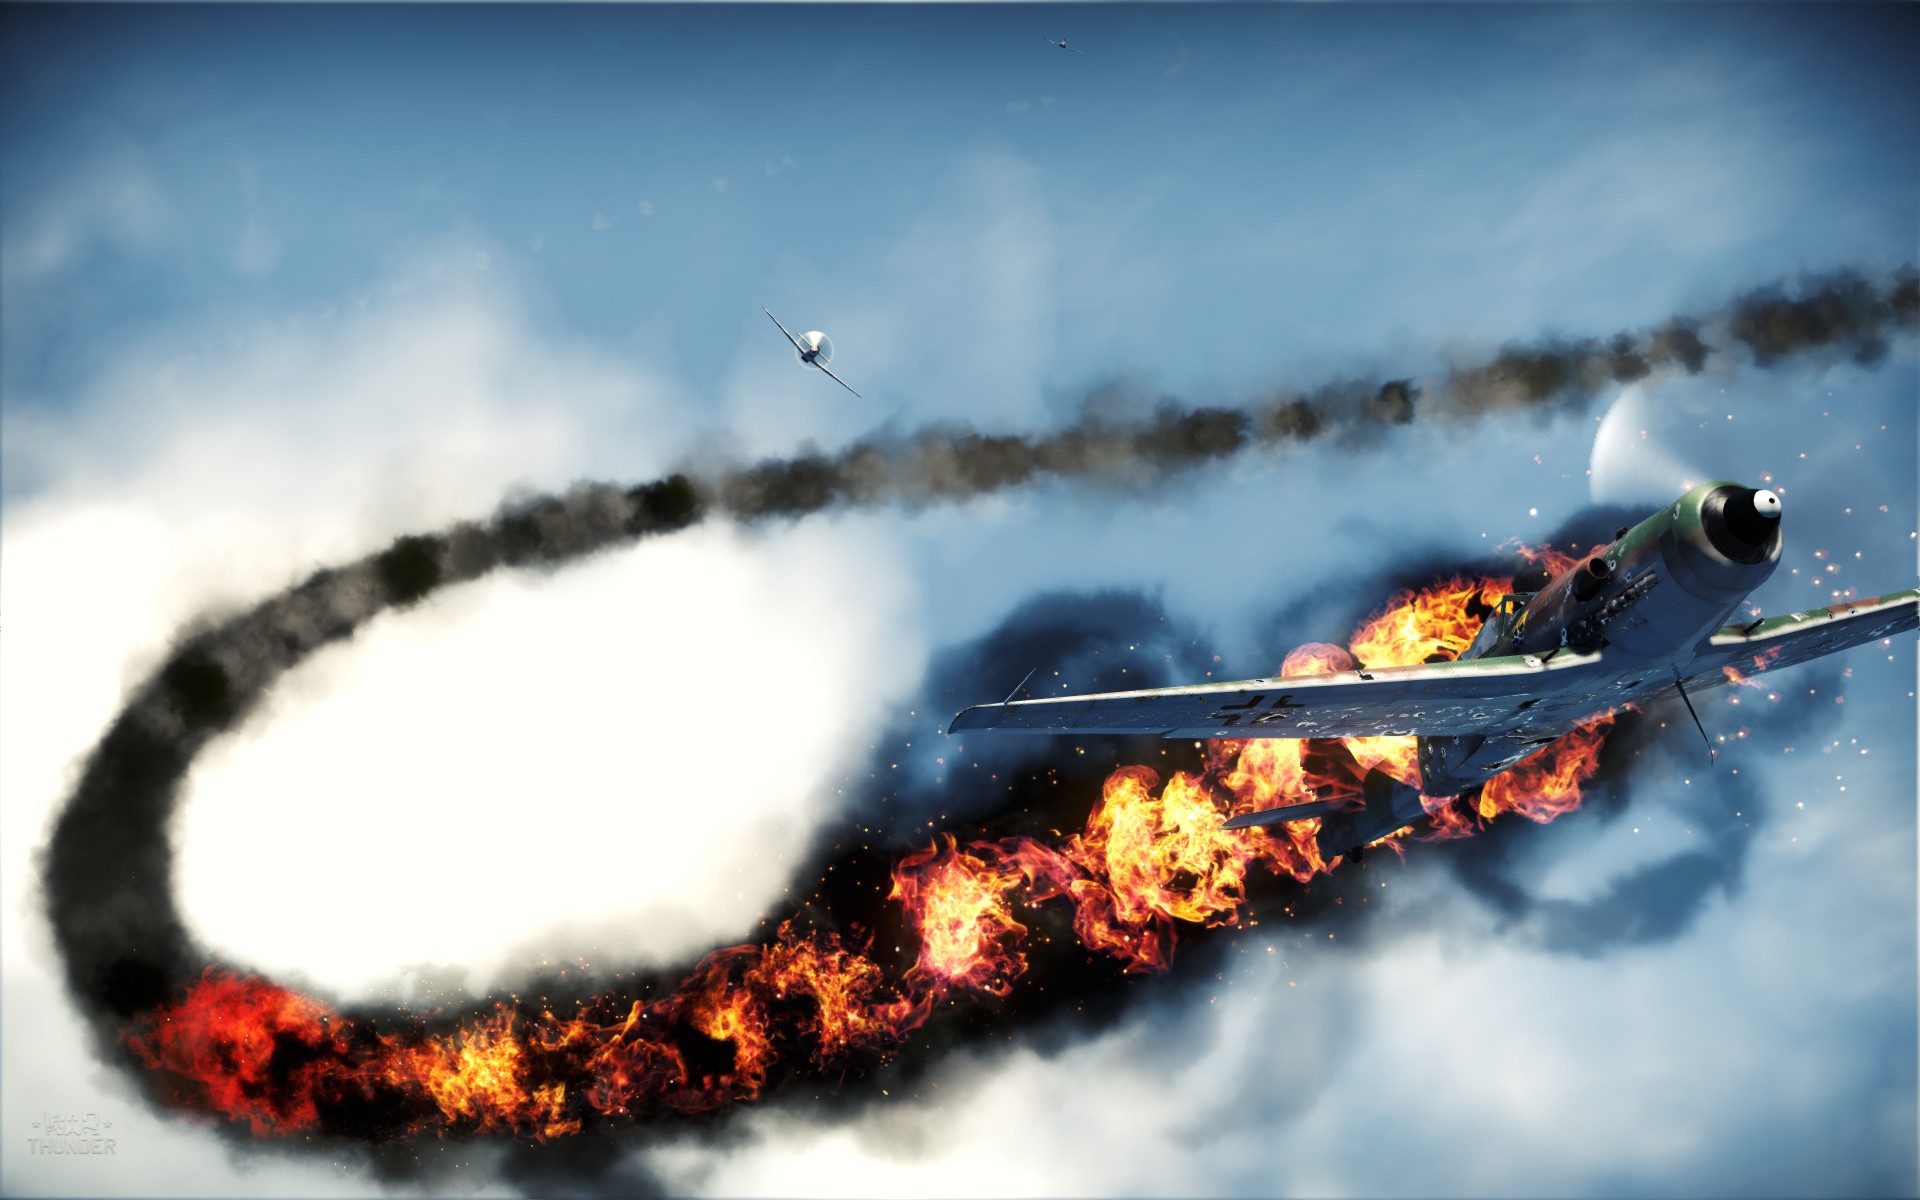 Free download War Thunder war plane has been hit wallpapers and images